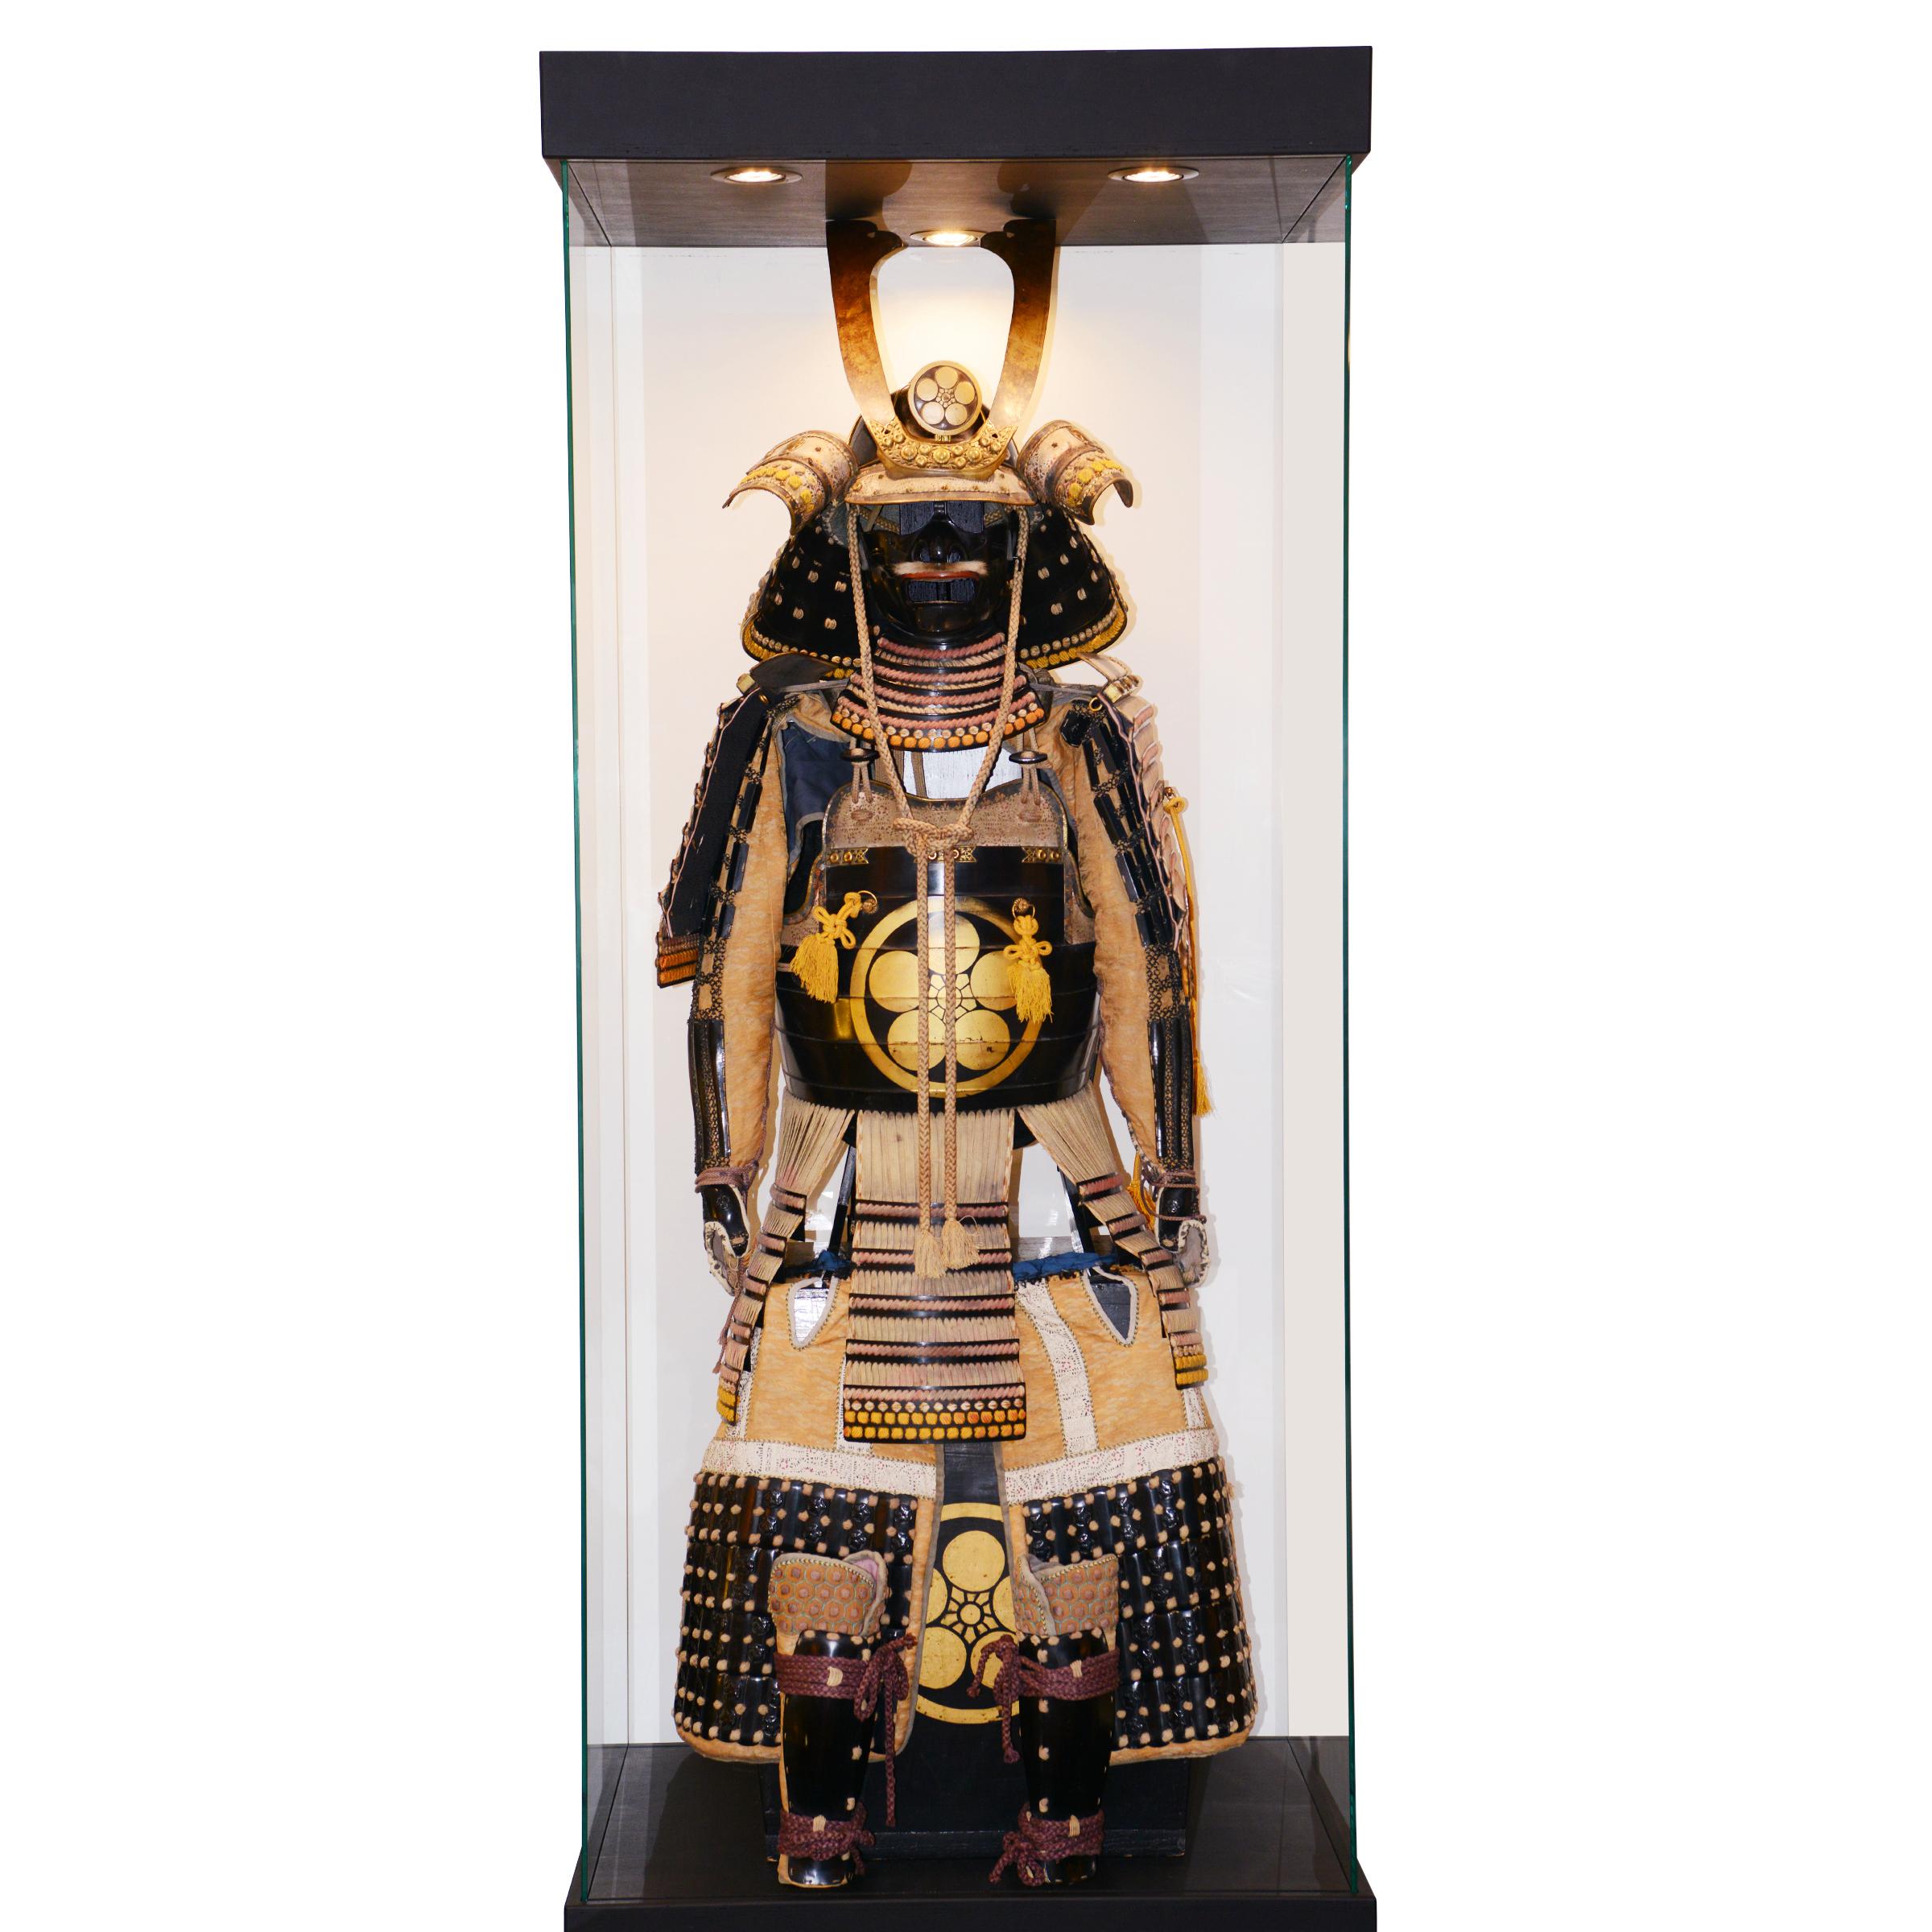 Armor Samuraï Maeda, ceremonial armor
with handcrafted helmet and protects.
Made with original japanese fabrics only use for
samuraï armor confection, with solid brass and
metal details, ceremonial armor with minor structural damages 
due to time